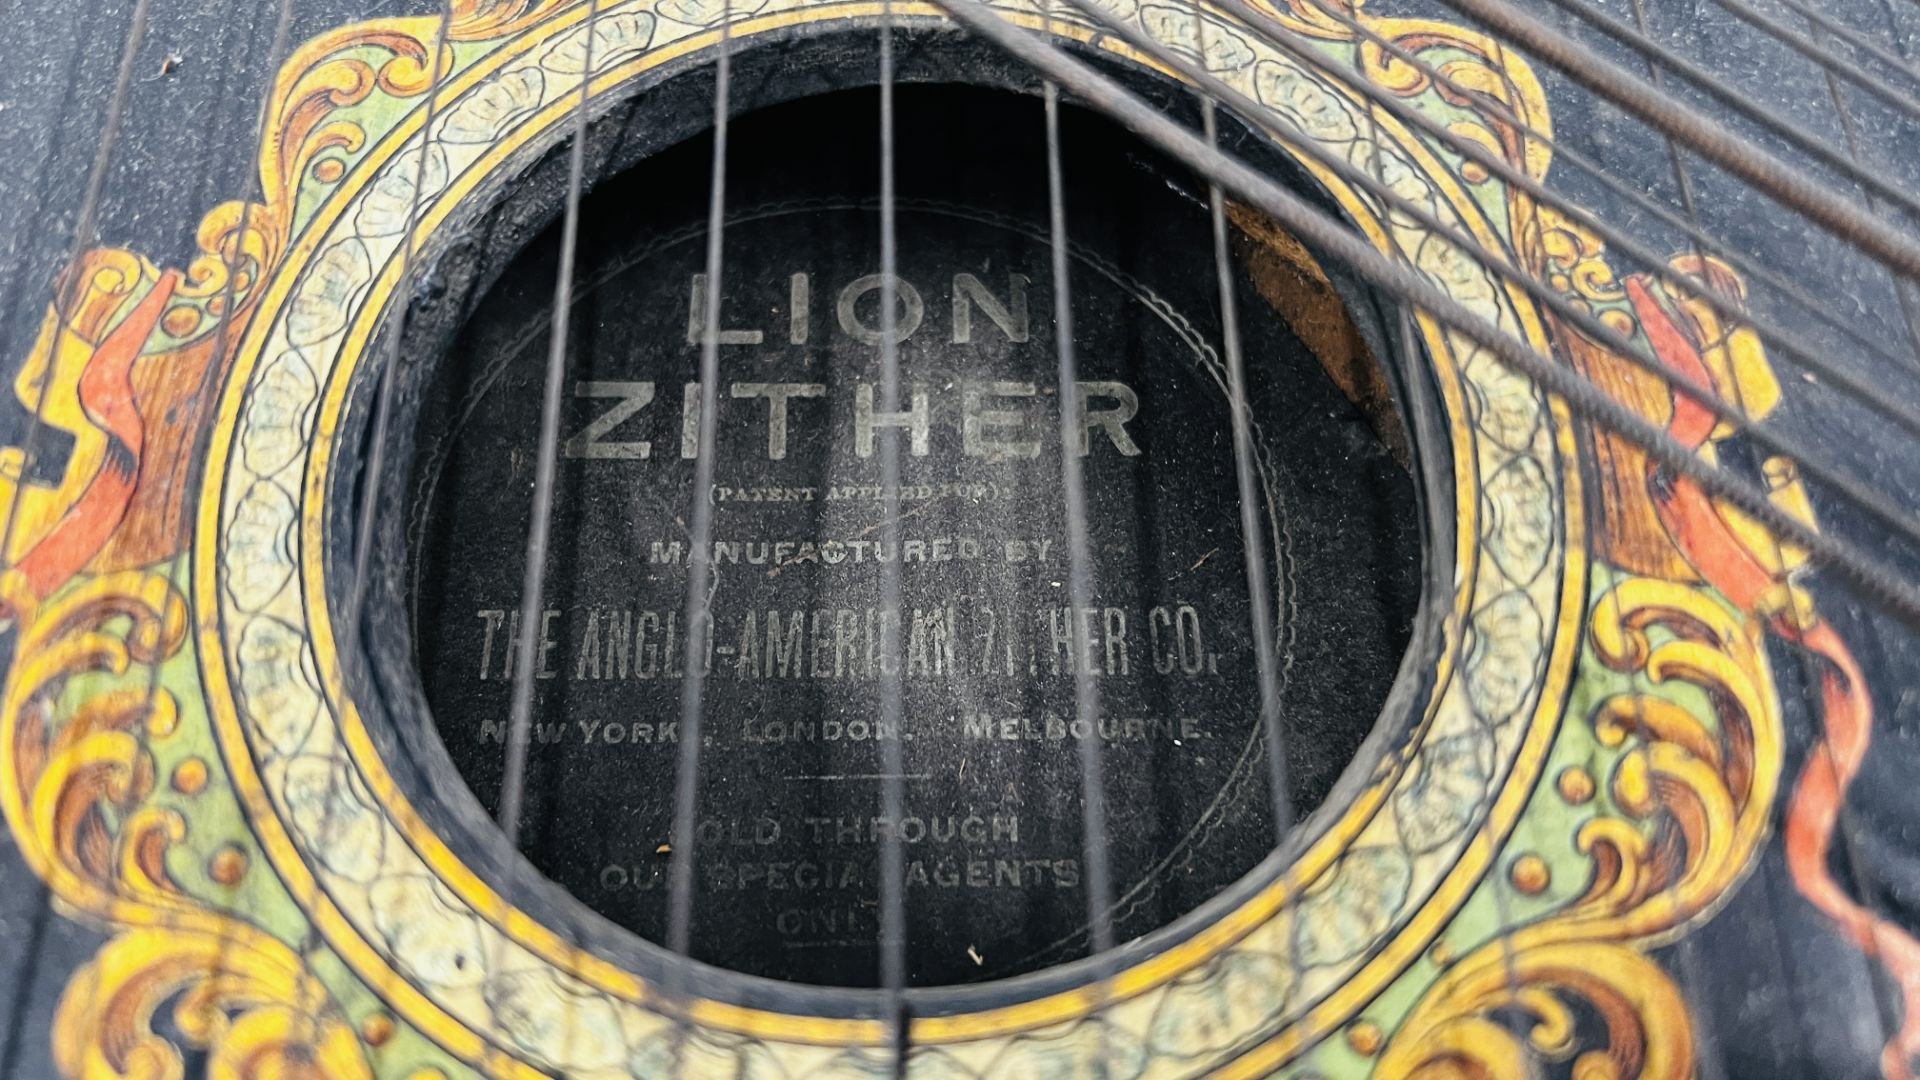 A VINTAGE "THE ANGLO AMERICAN LION ZITHER" MANUFACTURED BY THE ANGLO AMERICAN ZITHER Co NEW YORK - Image 2 of 13